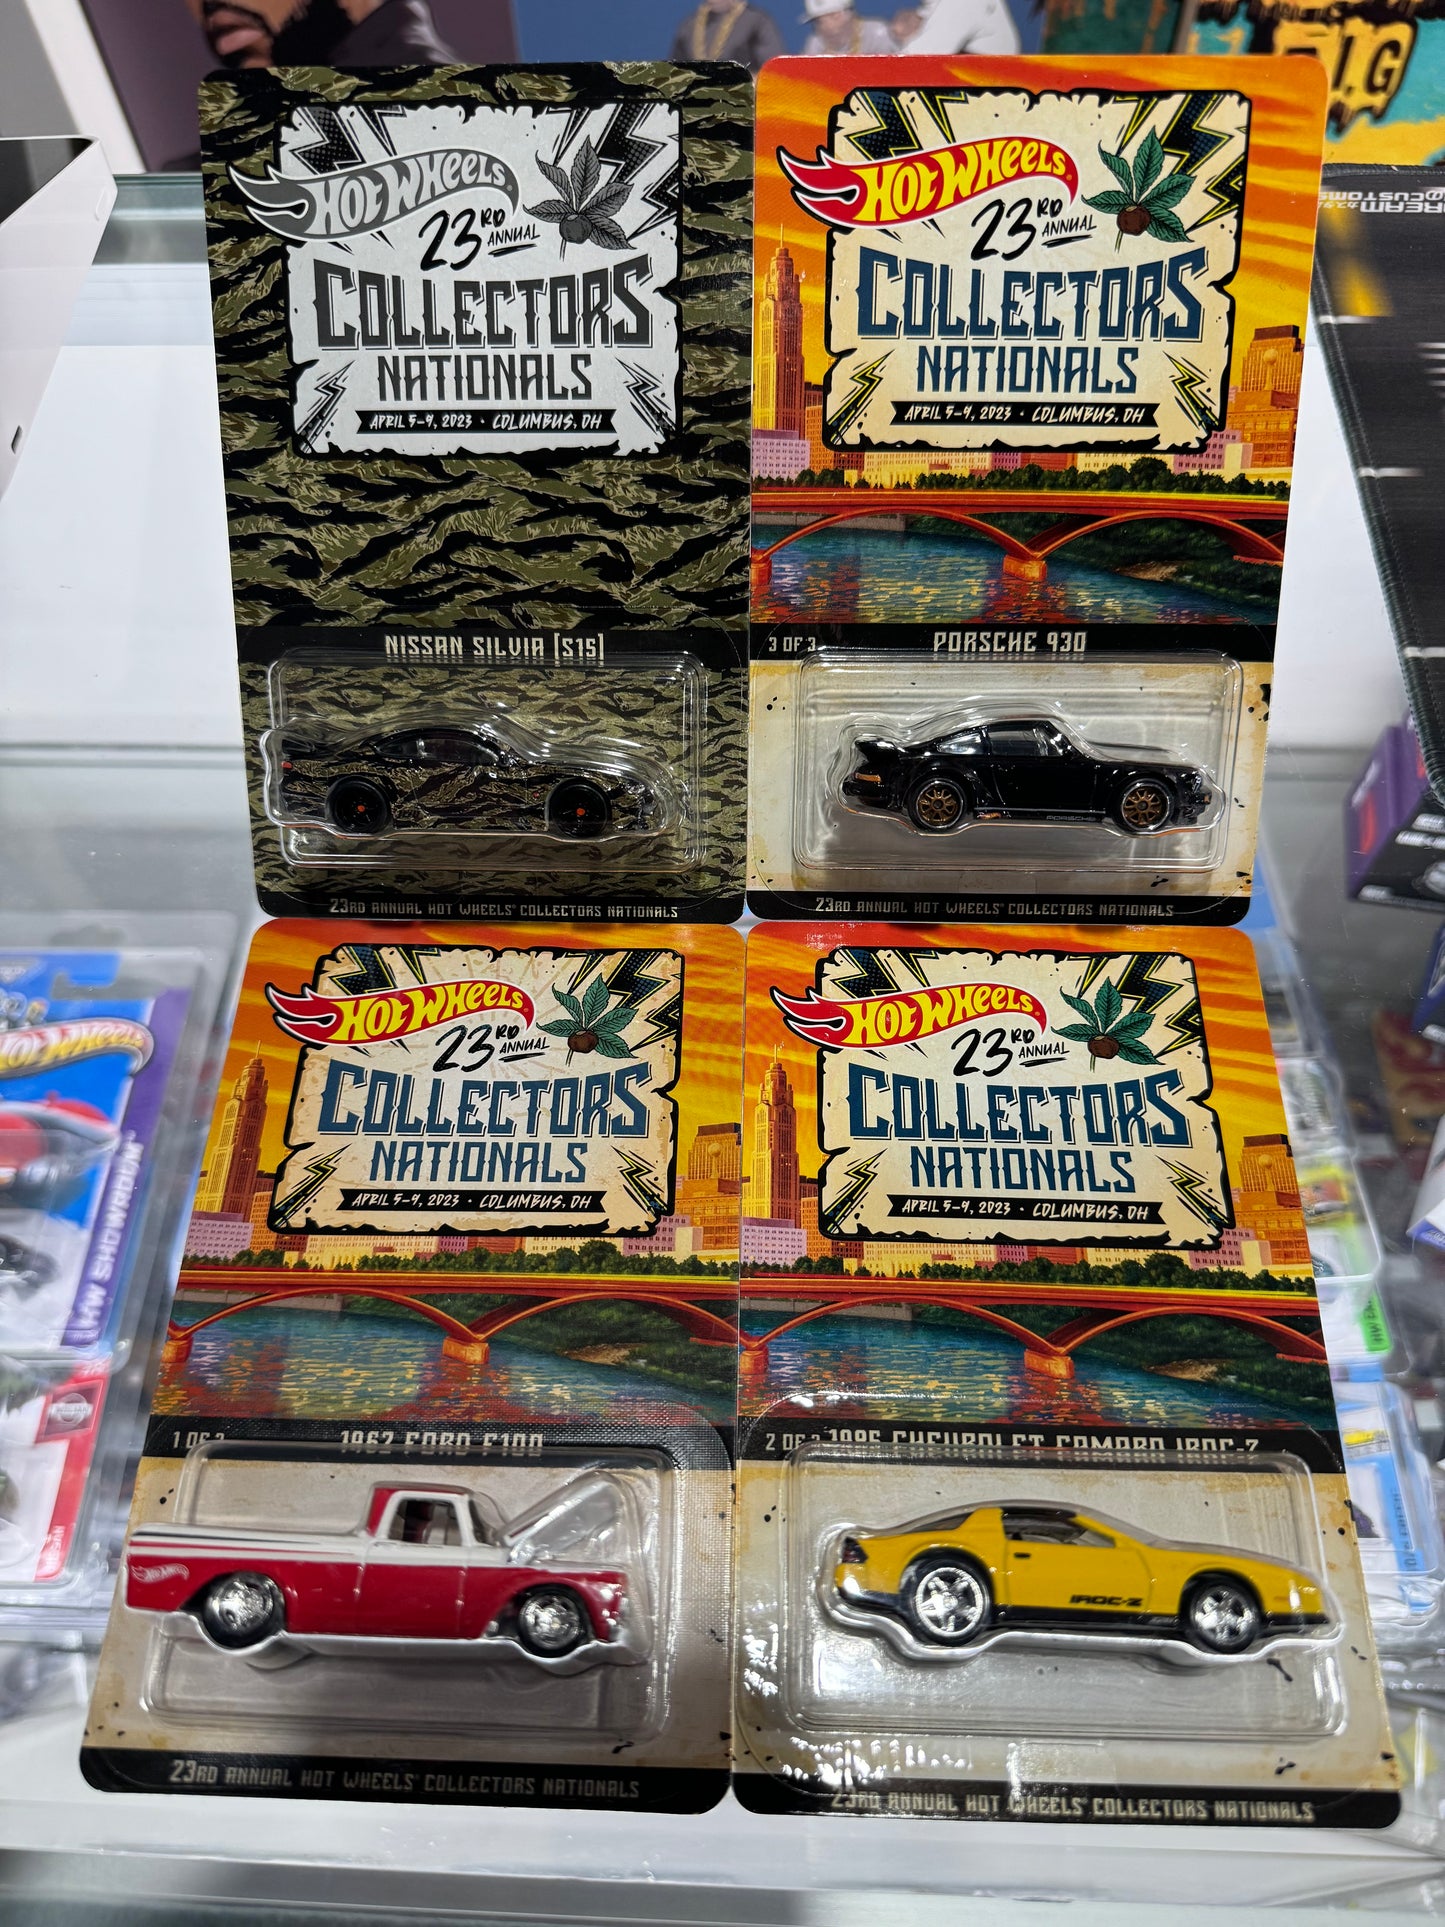 Hot Wheels 23rd Annual Collectors Convention Set (Matching Number #00194)